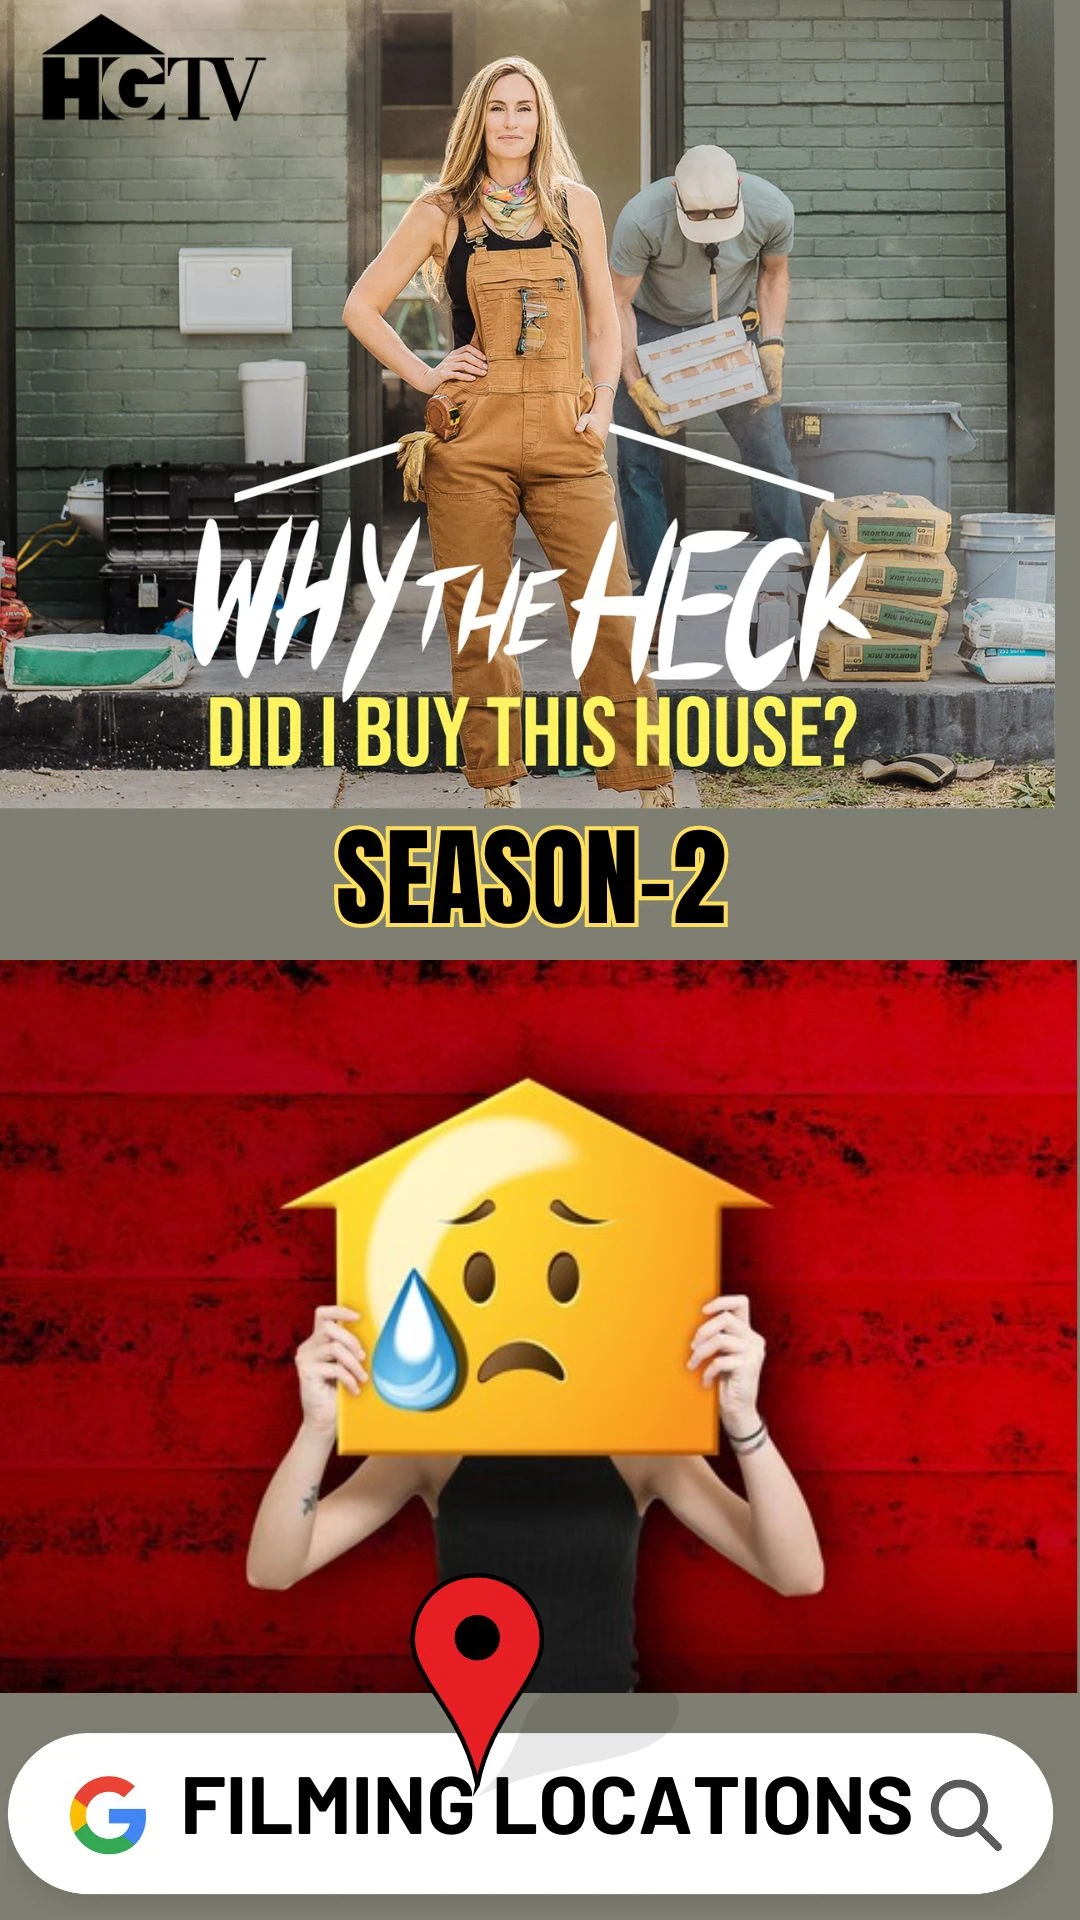  Why The Heck Did I Buy This House Season 2 Filming Locations 